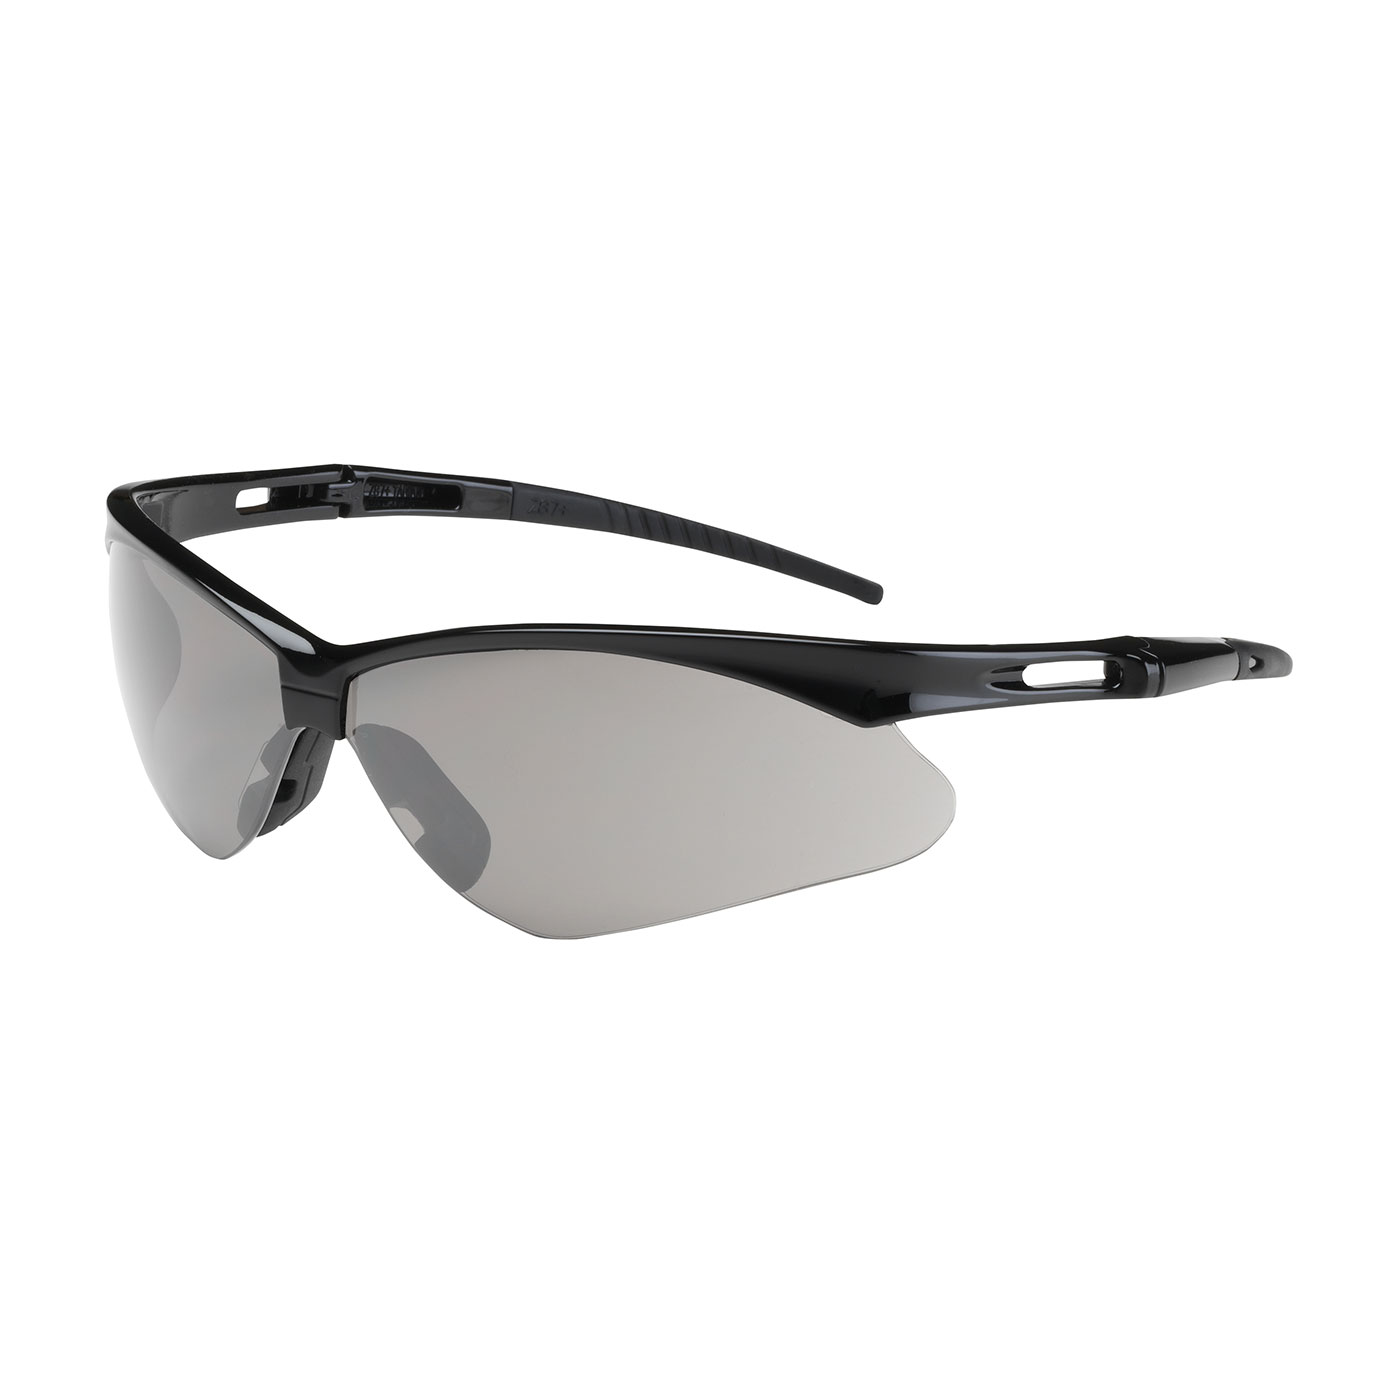 PIP 250-AN-10551 Anser Semi-Rimless Safety Glasses with Black Frame, Light Gray Lens and FogLess 3Sixty Coating PID-250AN10551